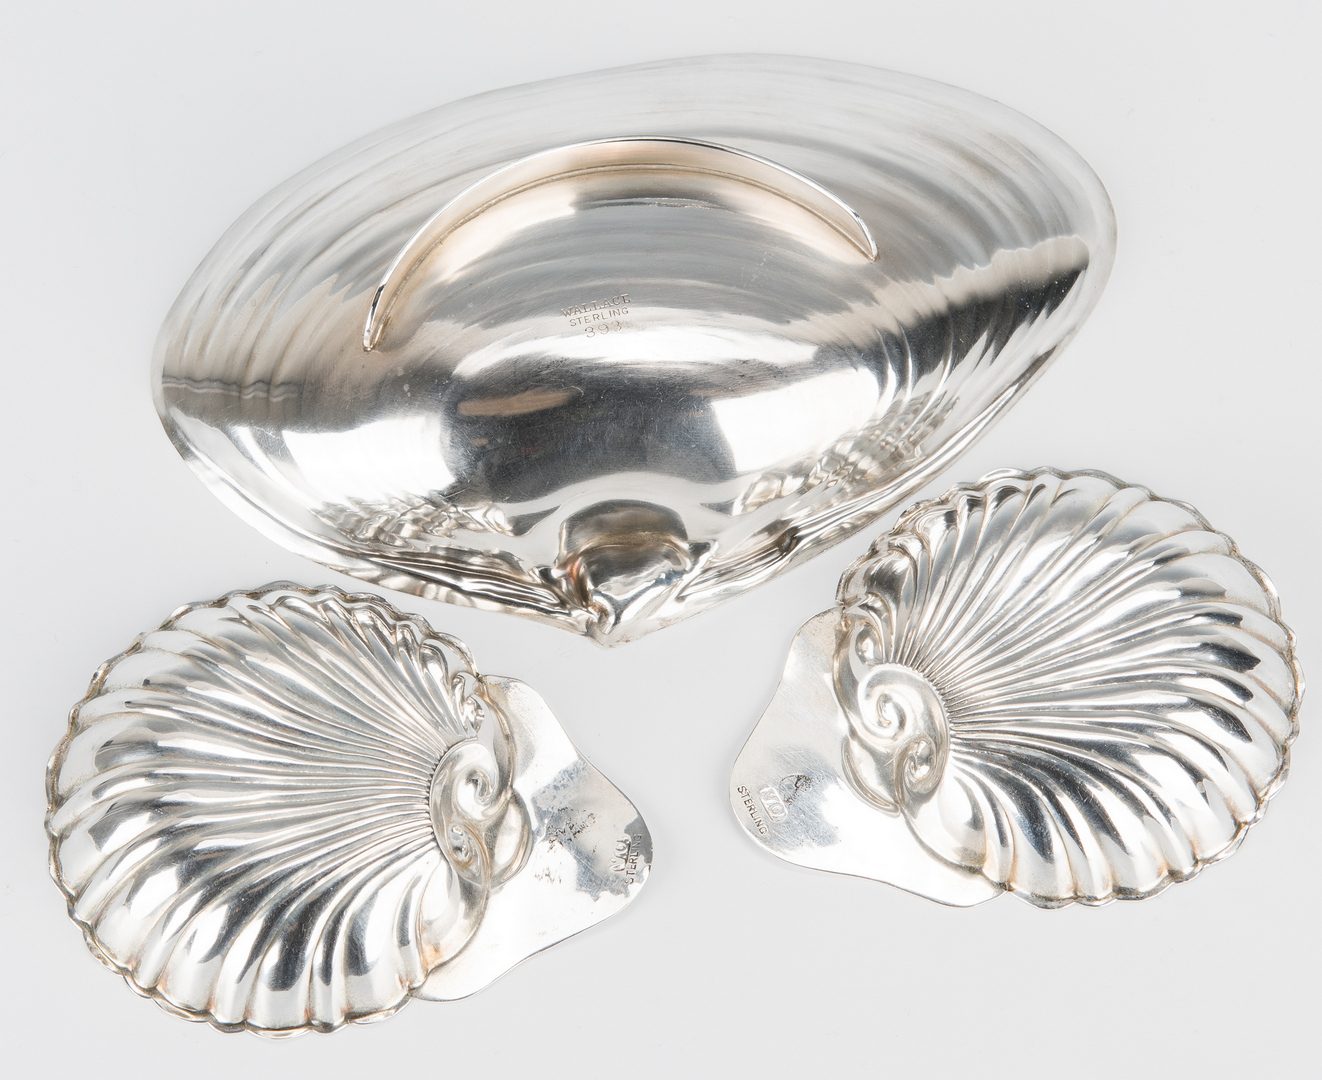 Lot 694: 23 Assorted Sterling Silver, incl. Cordials